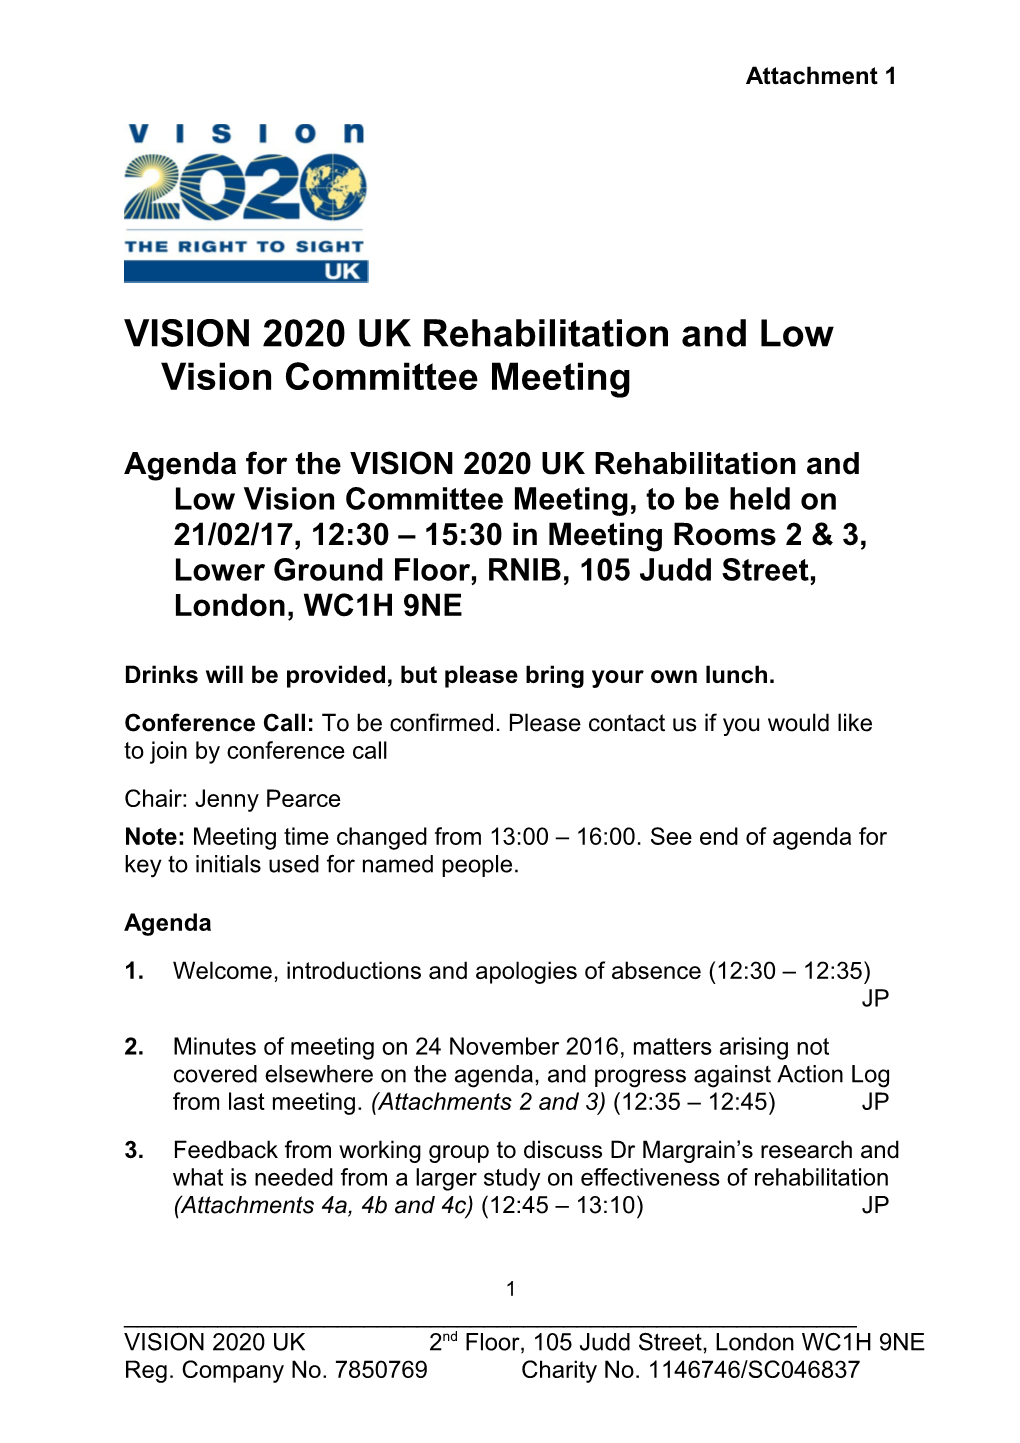 VISION 2020 UK Rehabilitation and Low Vision Committee Meeting